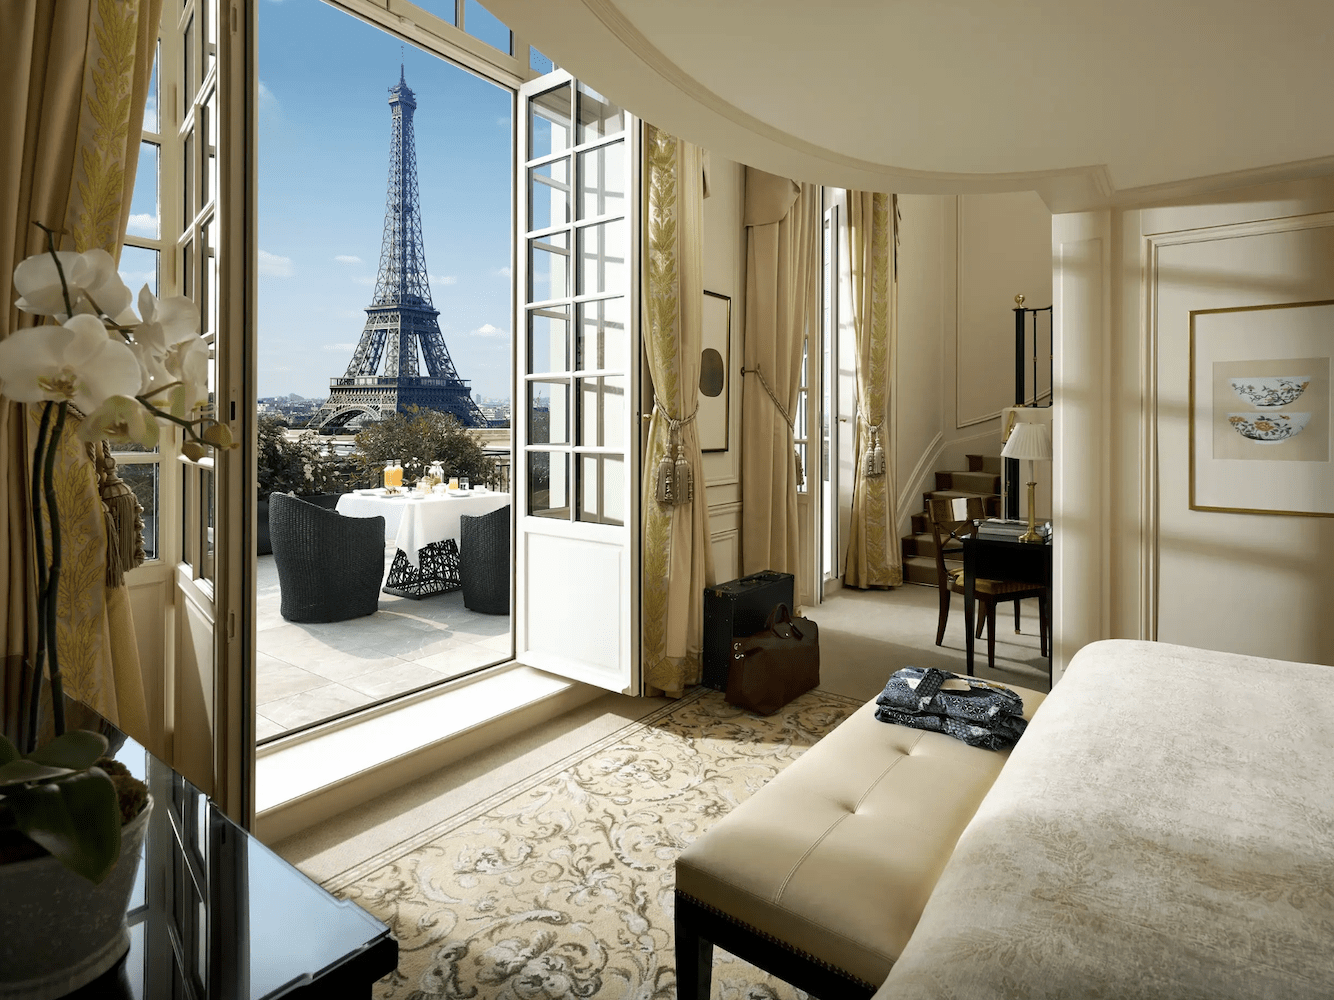 guide to palace hotels in paris shangri-la